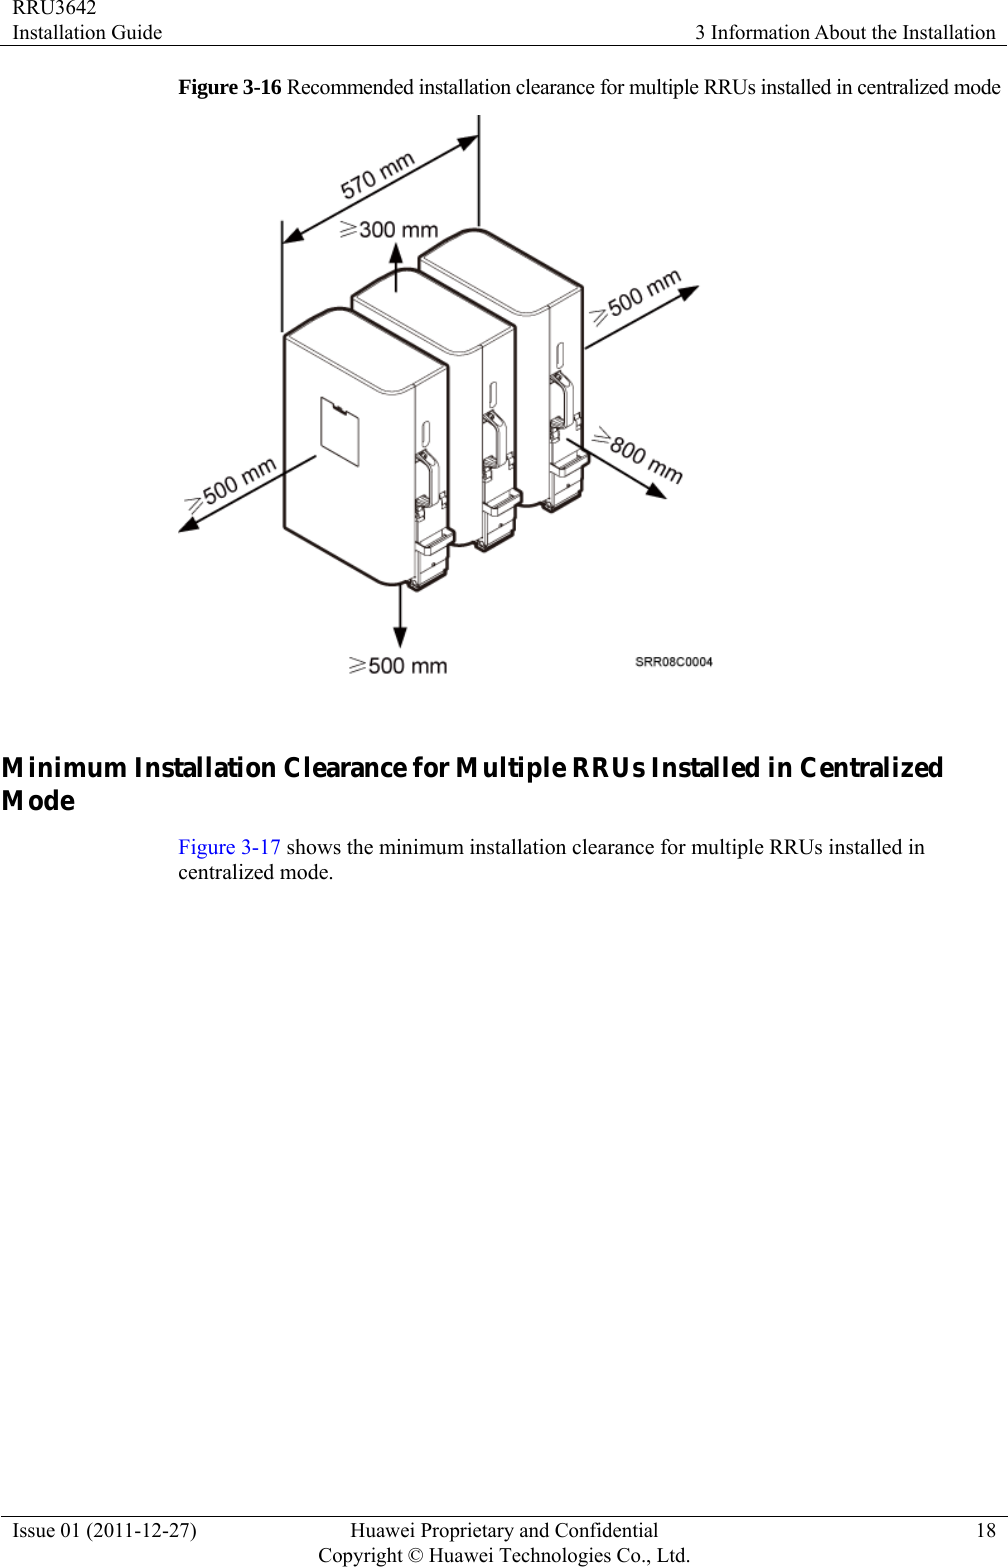 RRU3642 Installation Guide  3 Information About the Installation Issue 01 (2011-12-27)  Huawei Proprietary and Confidential         Copyright © Huawei Technologies Co., Ltd.18 Figure 3-16 Recommended installation clearance for multiple RRUs installed in centralized mode   Minimum Installation Clearance for Multiple RRUs Installed in Centralized Mode Figure 3-17 shows the minimum installation clearance for multiple RRUs installed in centralized mode. 